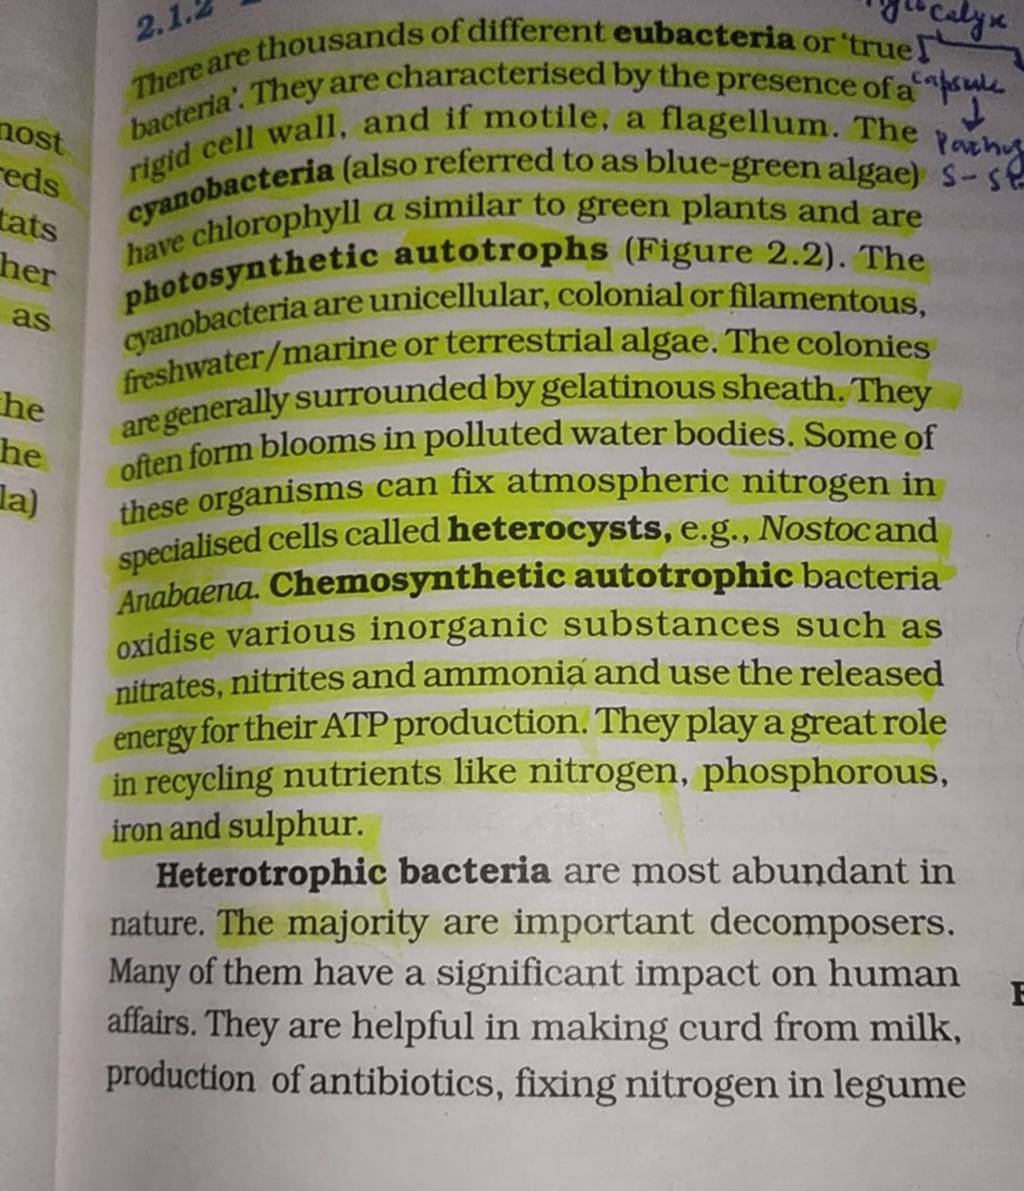 2. 1.2 are thousands of different eubacteria or truel There are' They 